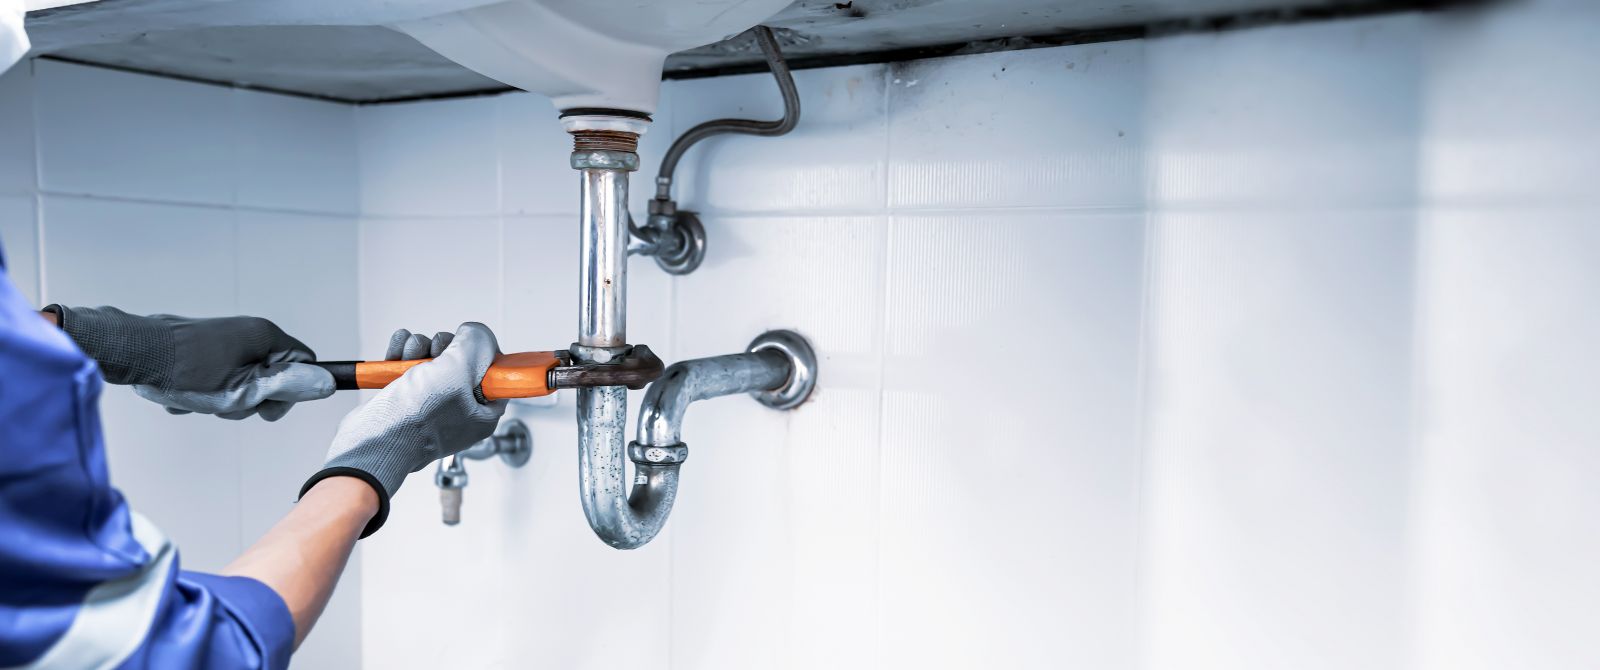 10 Tips for Preventing Plumbing Disasters at Home